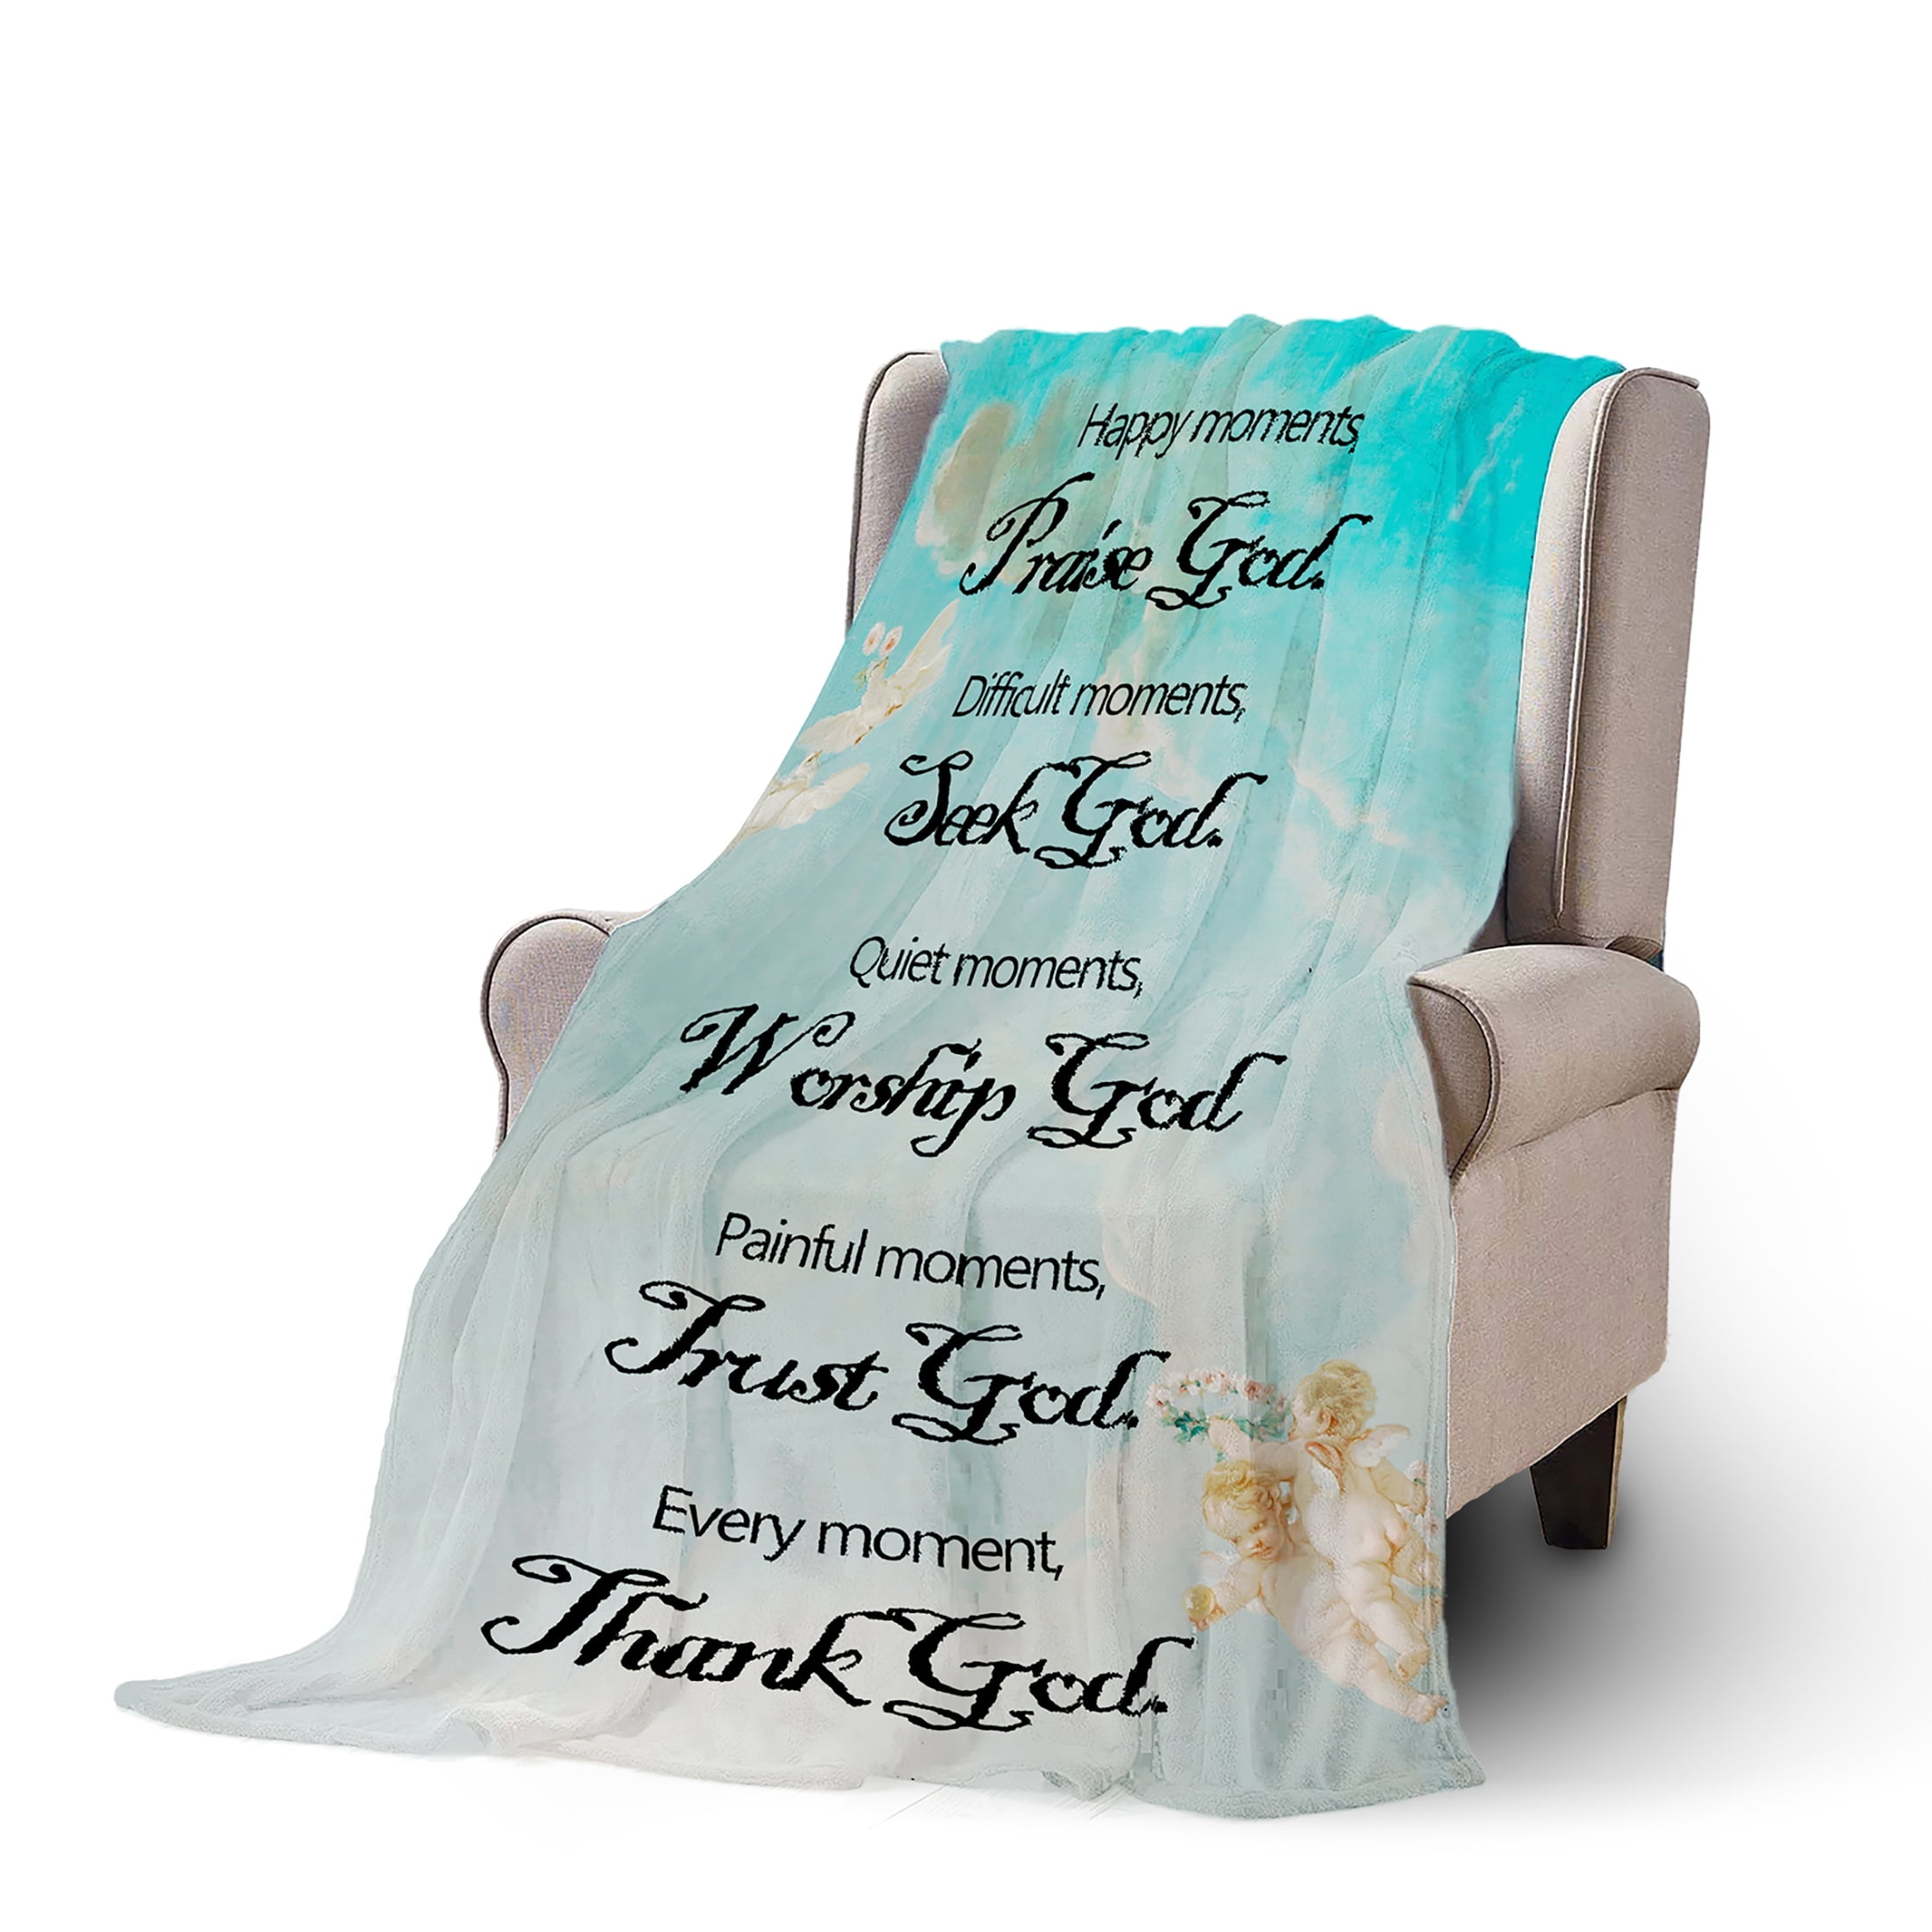 Religious Gift Blanket Throw with Inspirational Bible Verse Scripture Print Blanket 60x80 inch Twin Size Mother's Day Birthday Gifts Spiritual Gift Christian Gifts for Women